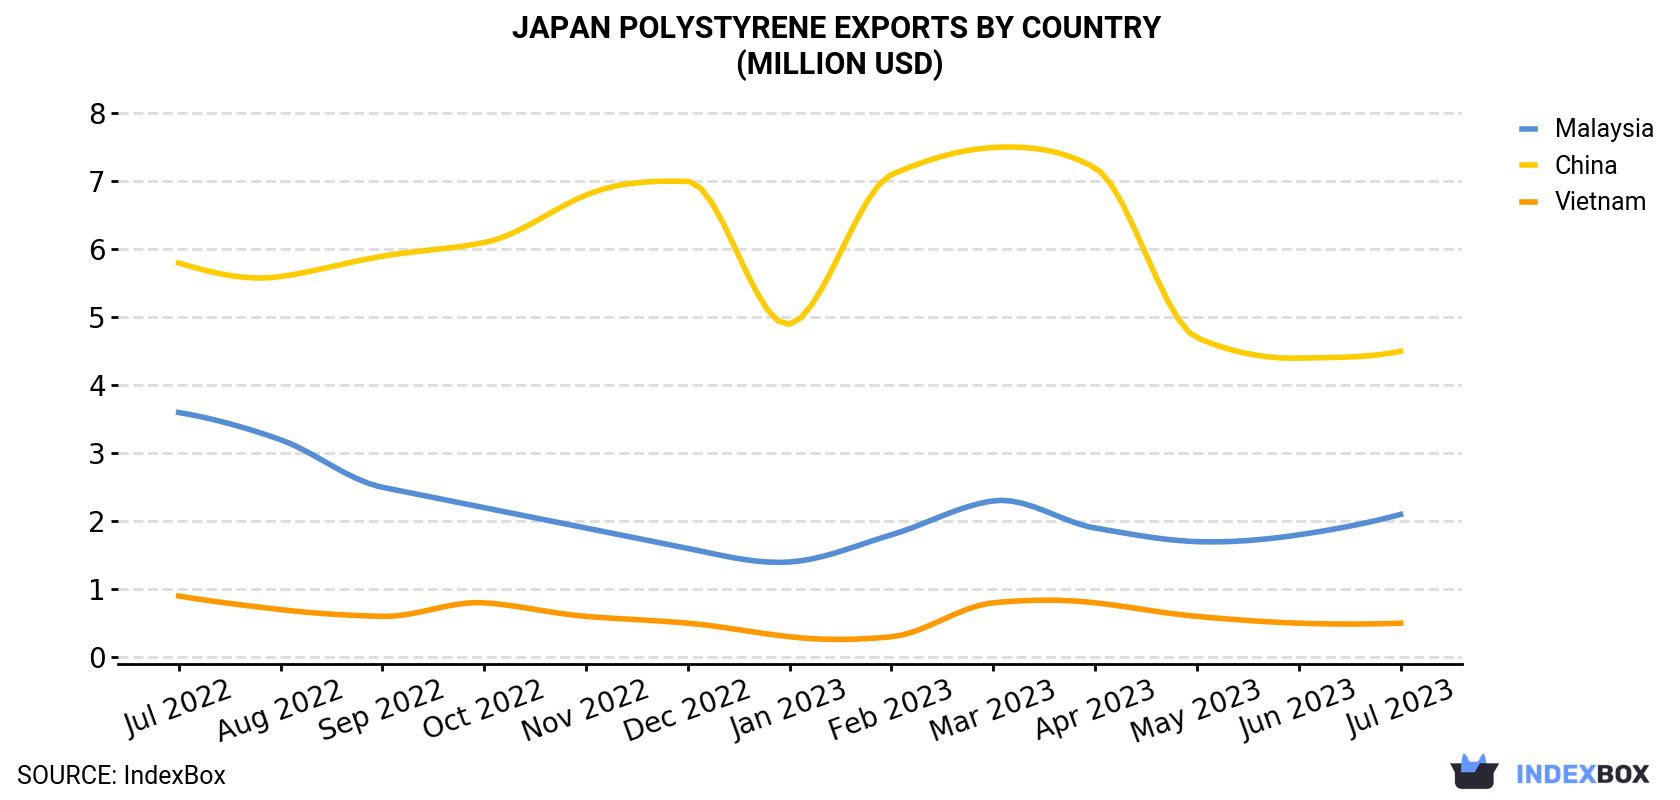 Japan Polystyrene Exports By Country (Million USD)